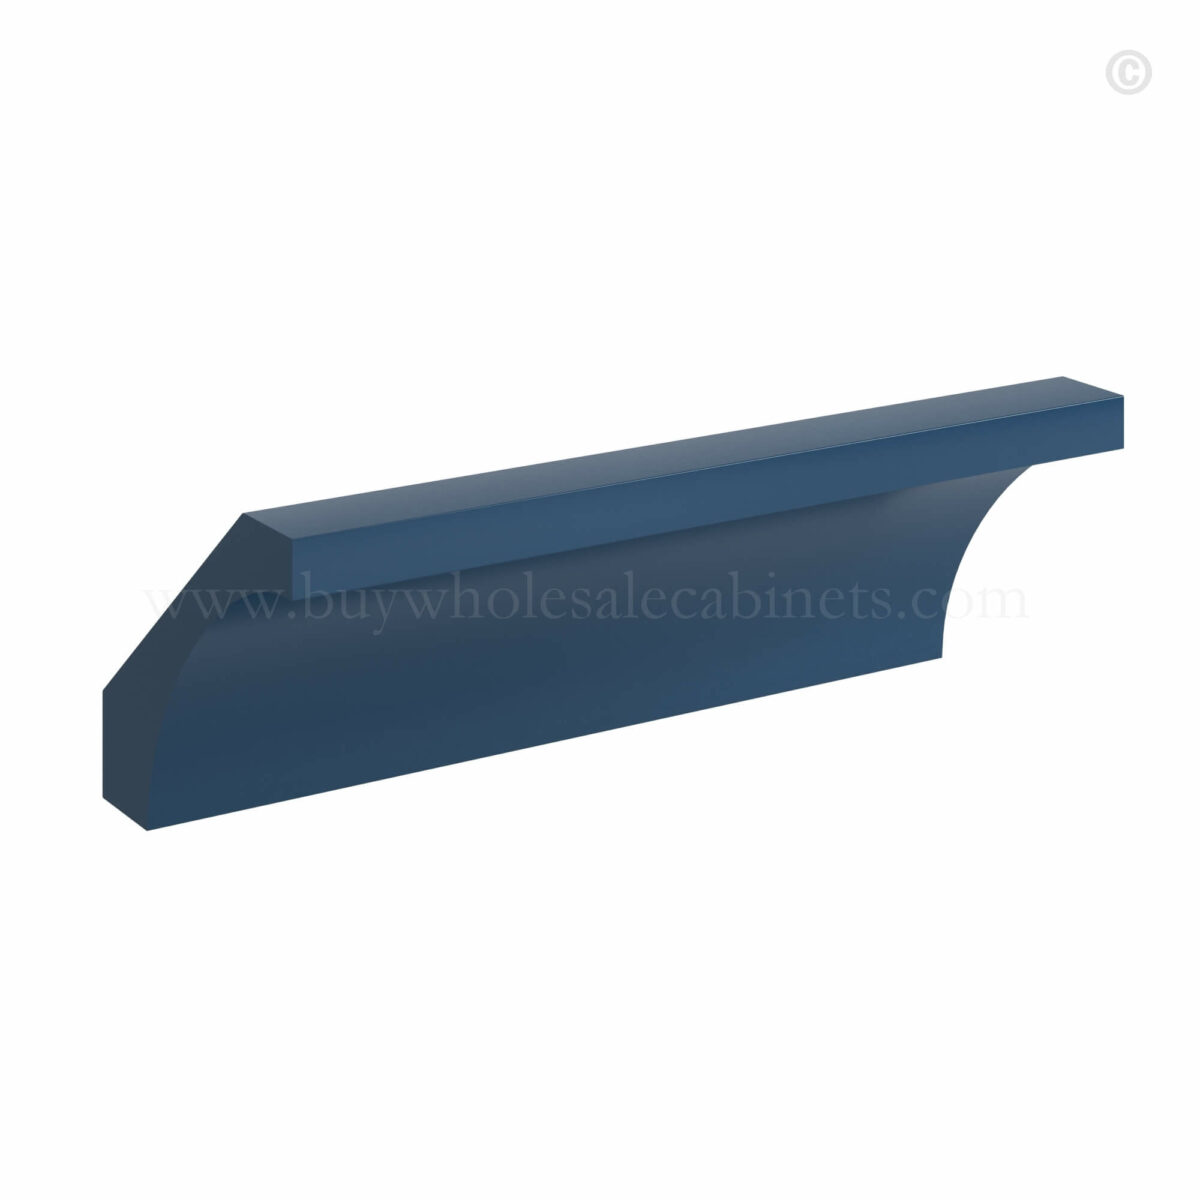 Navy Blue Shaker Cove Crown Moulding